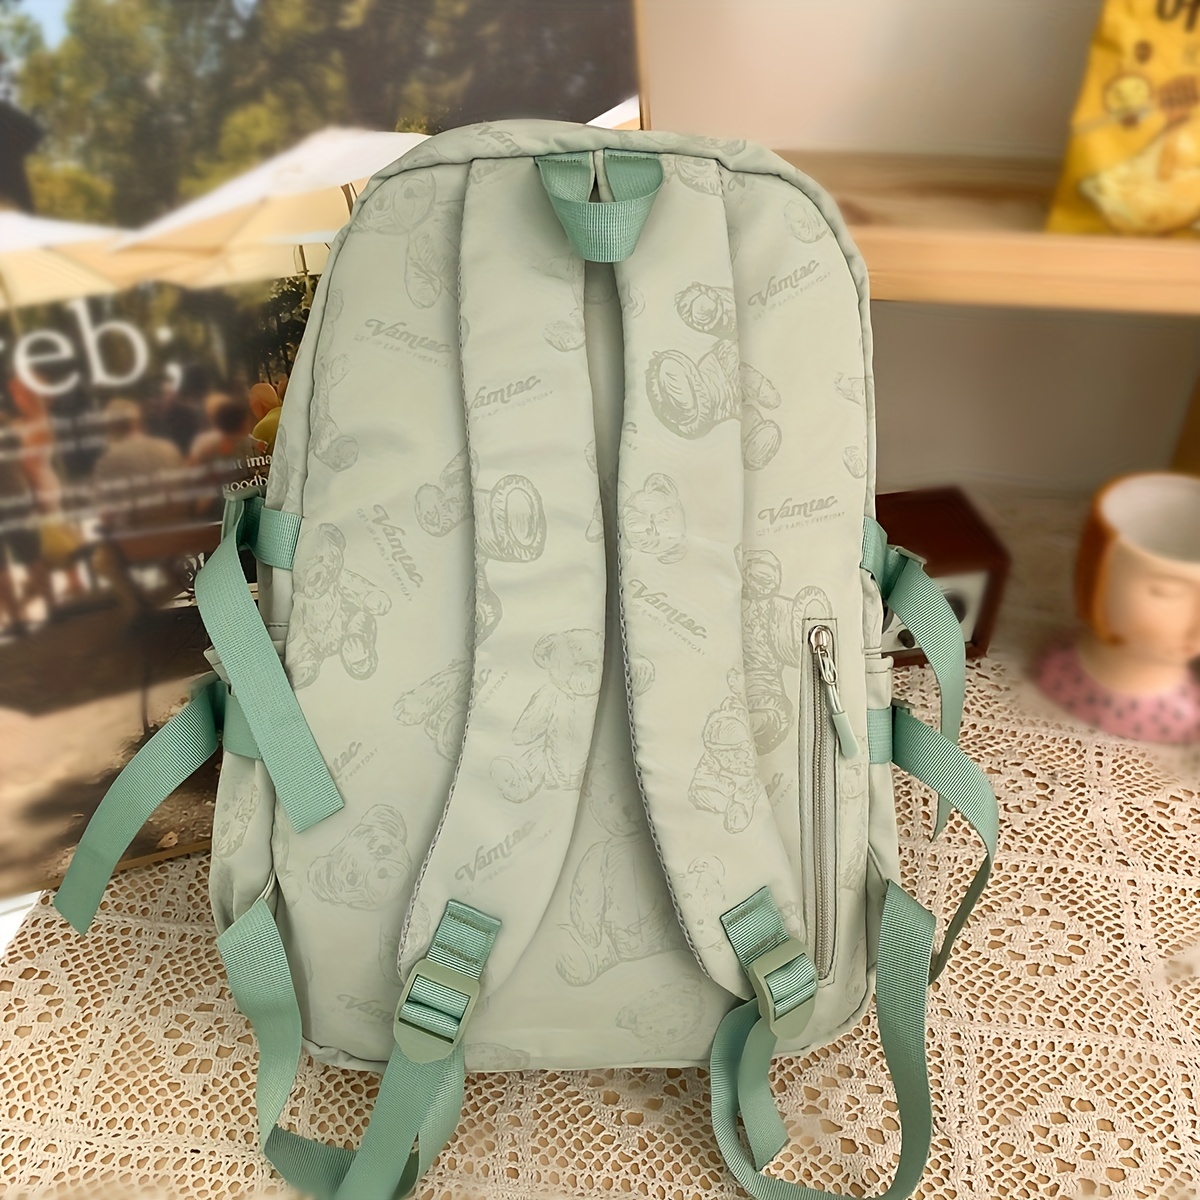 Green Campus Backpack